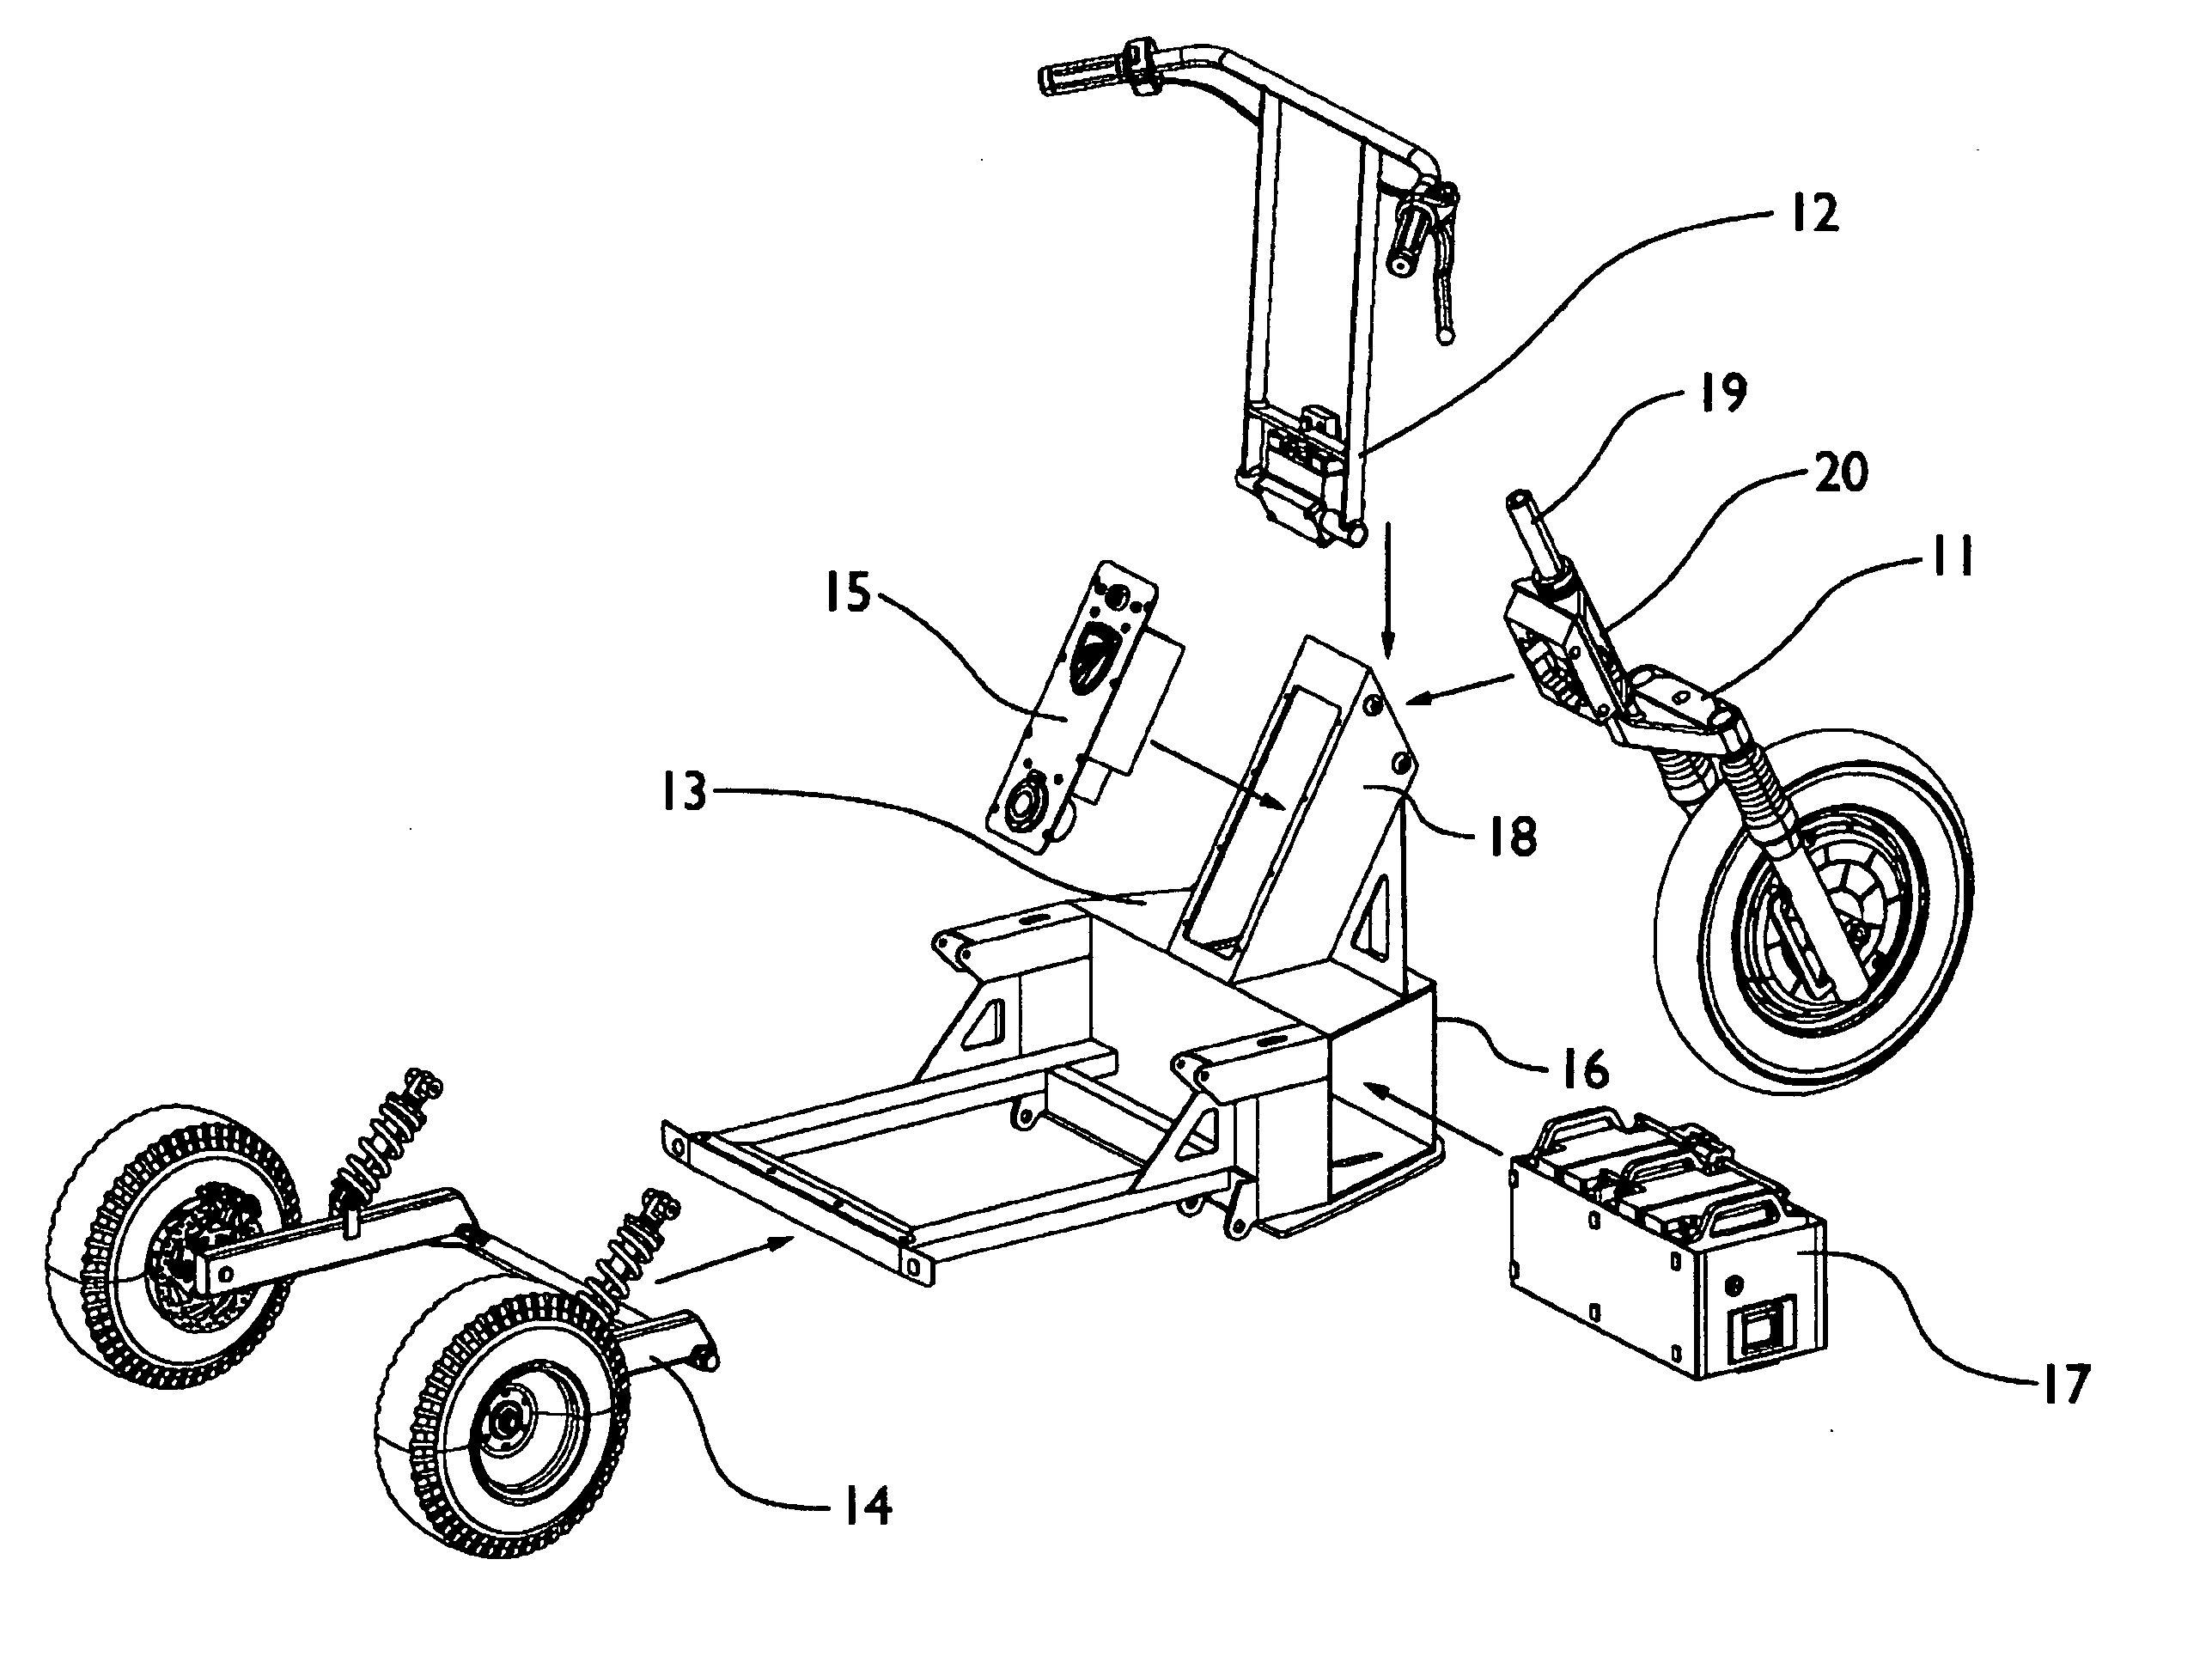 3-Wheeled stand-up personal mobility vehicle and components therein